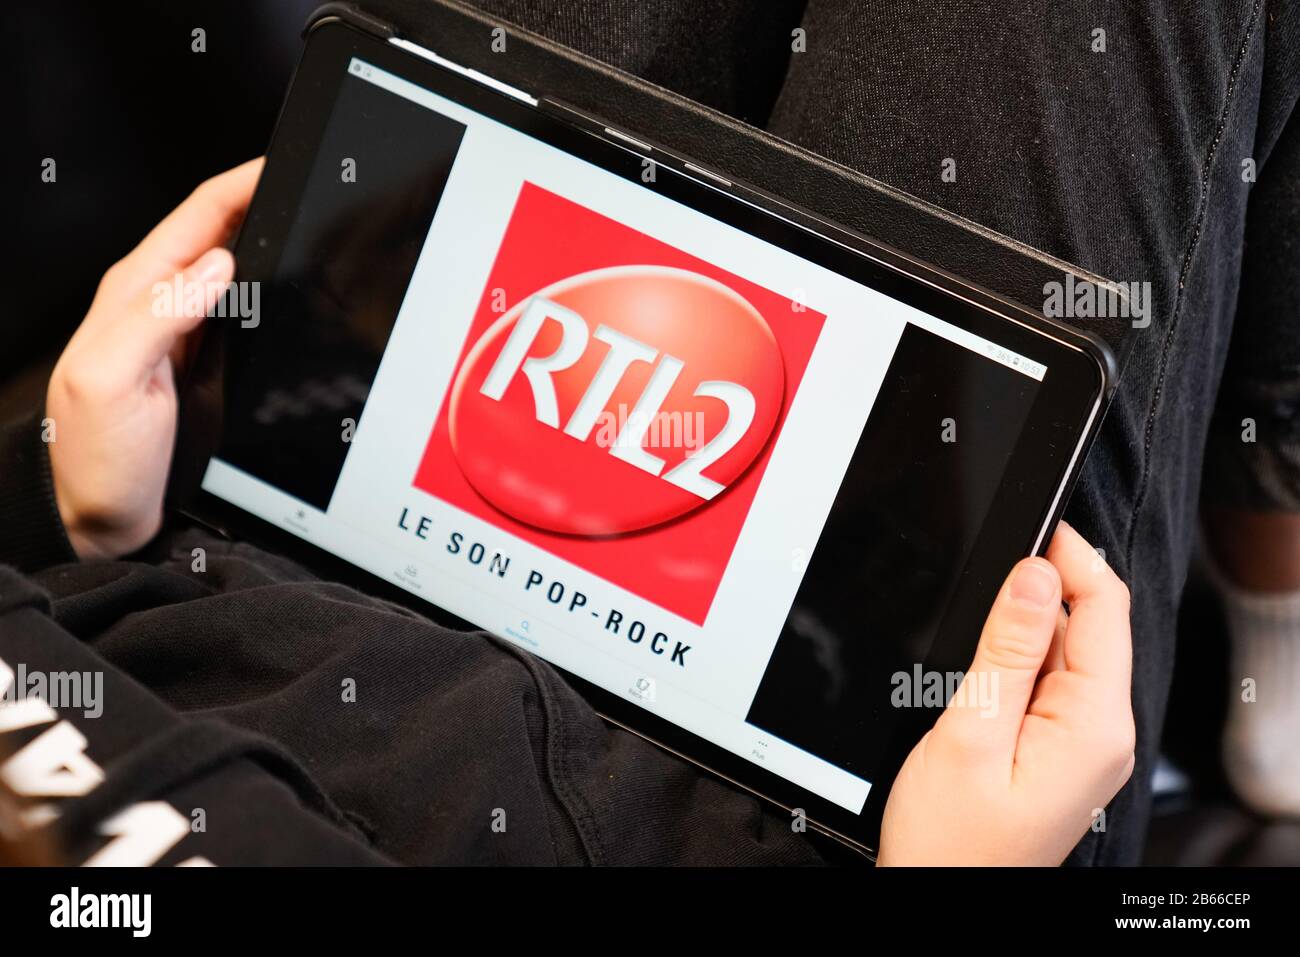 Bordeaux , Aquitaine / France - 11 27 2019 : RTL2 logo sign tablet screen  private French luxembourg radio station Stock Photo - Alamy